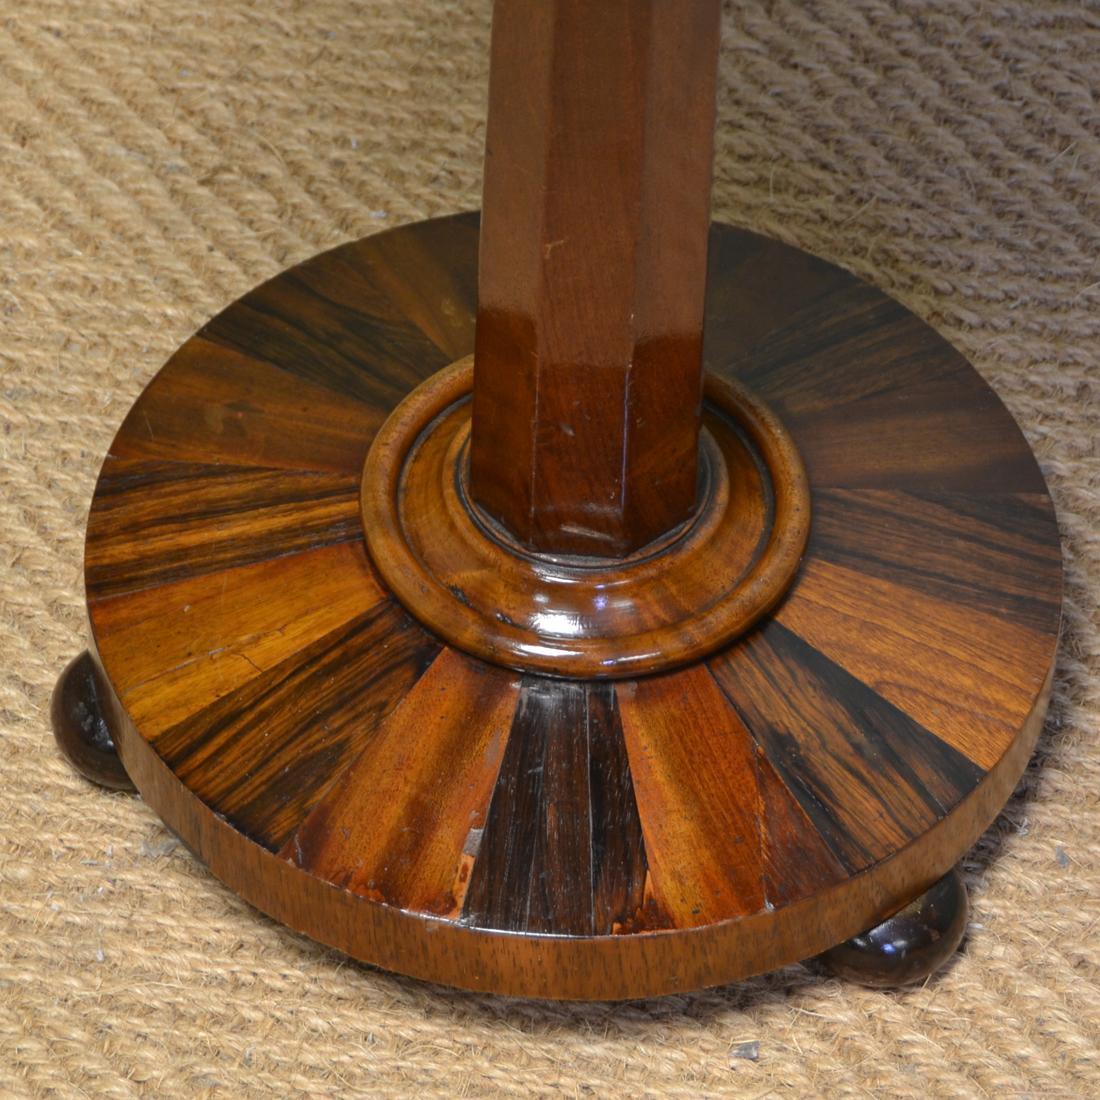 Unusual Victorian antique specimen occasional table

This unusual antique specimen occasional table has a lovely octagonal top with the most spectacular inlays and dates from circa 1870. It stands on an octagonal tapering pedestal with circular